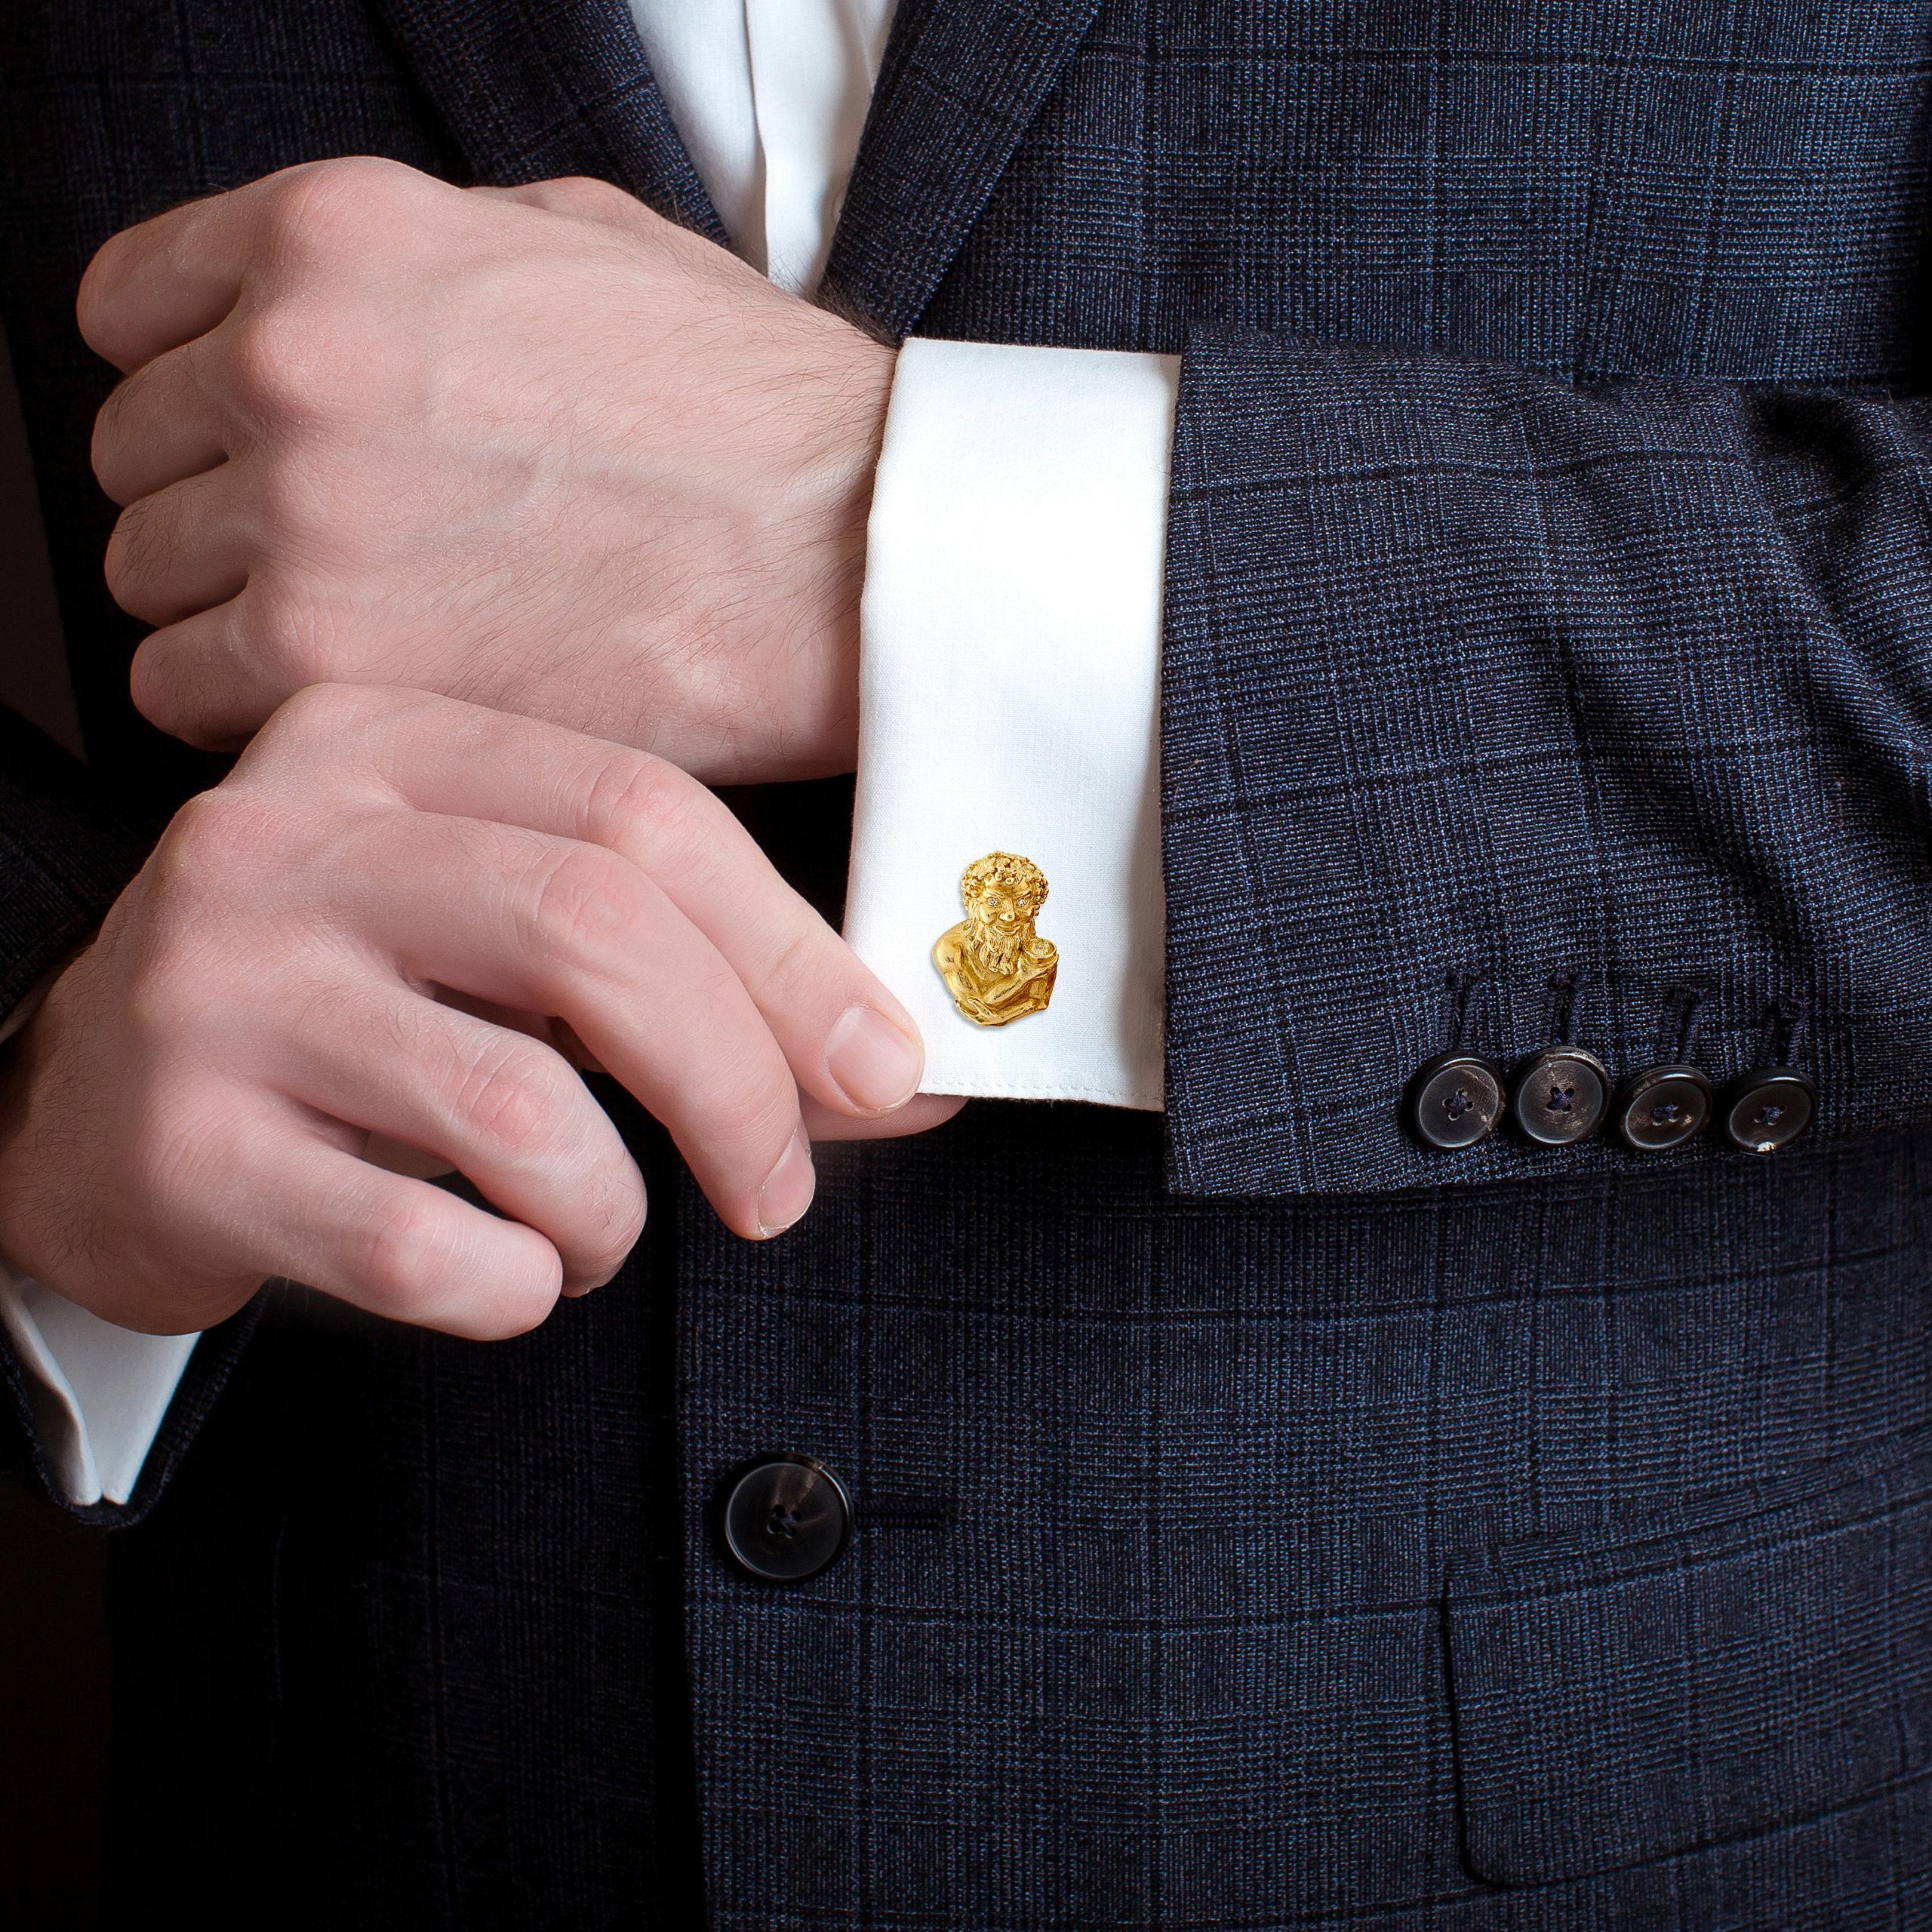 An exquisite pair of Bacchus diamond cufflinks set in solid 18 karat yellow gold, circa 1970. 
Each cufflink is designed as a bust of Bacchus, the mythical Greek character commonly known as the the God of wine. Here you can clearly see him holding a